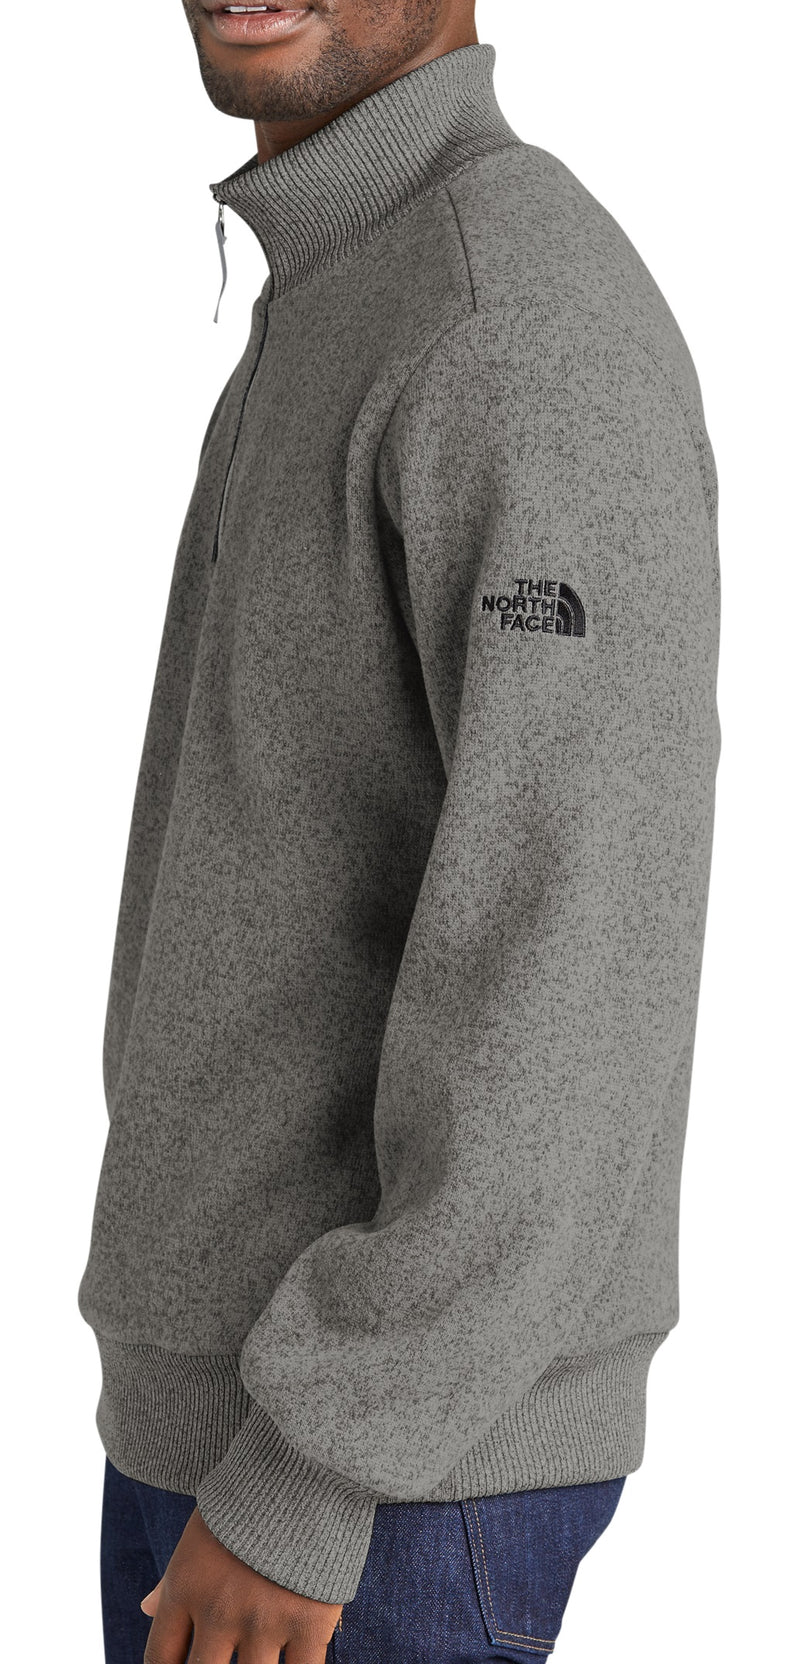 The North Face [NF0A5ISE] Pullover 1/2-Zip Sweater Fleece.